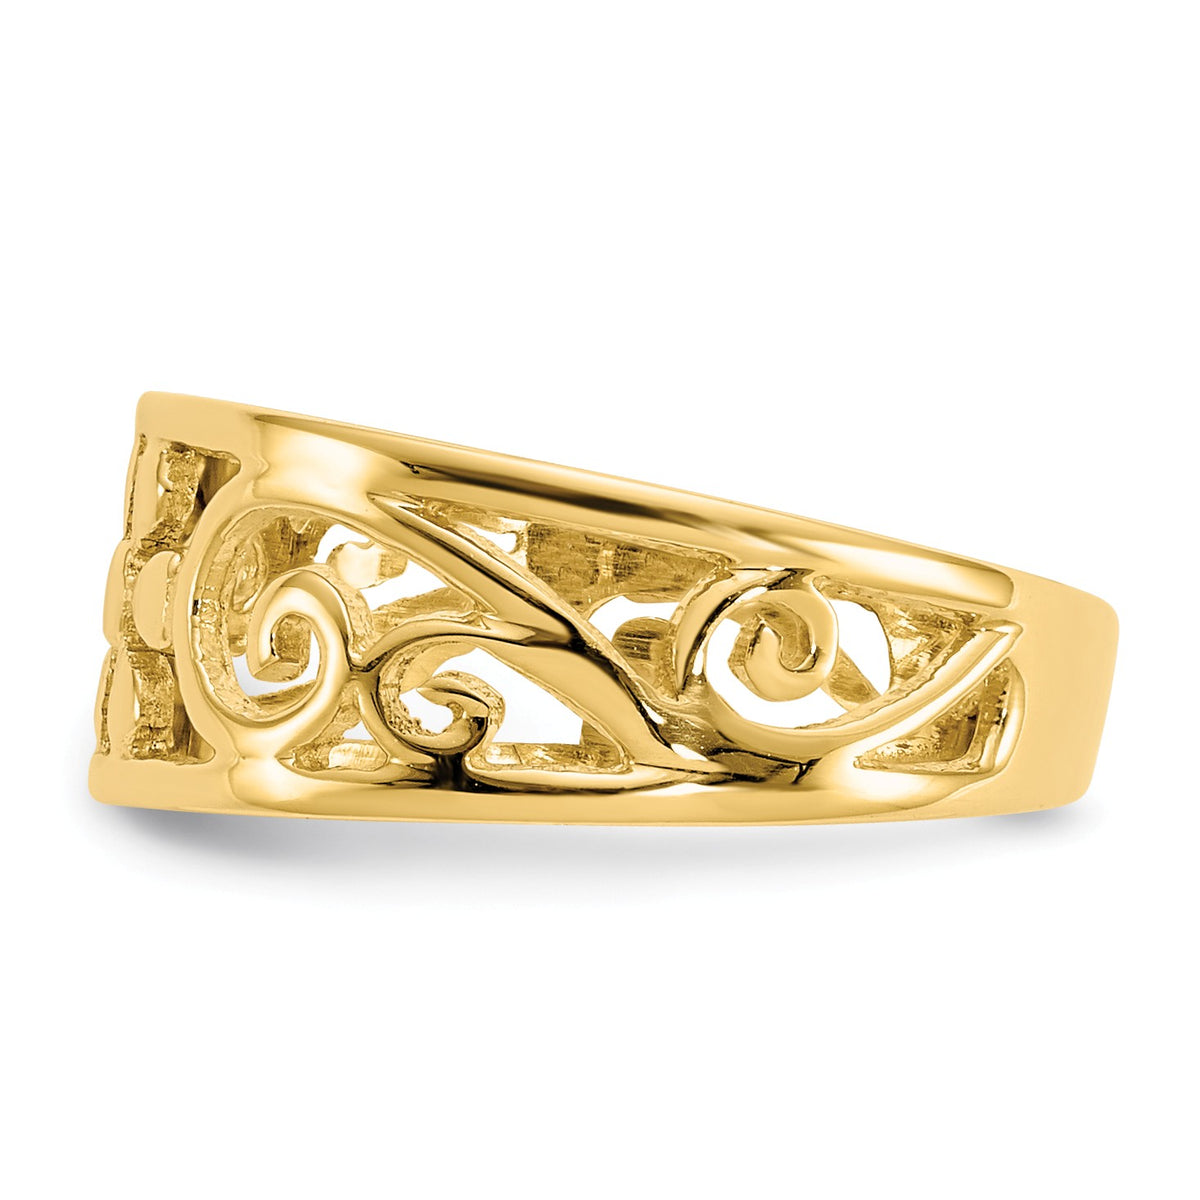 Alternate view of the Daisy Flower Toe Ring in 14 Karat Gold by The Black Bow Jewelry Co.